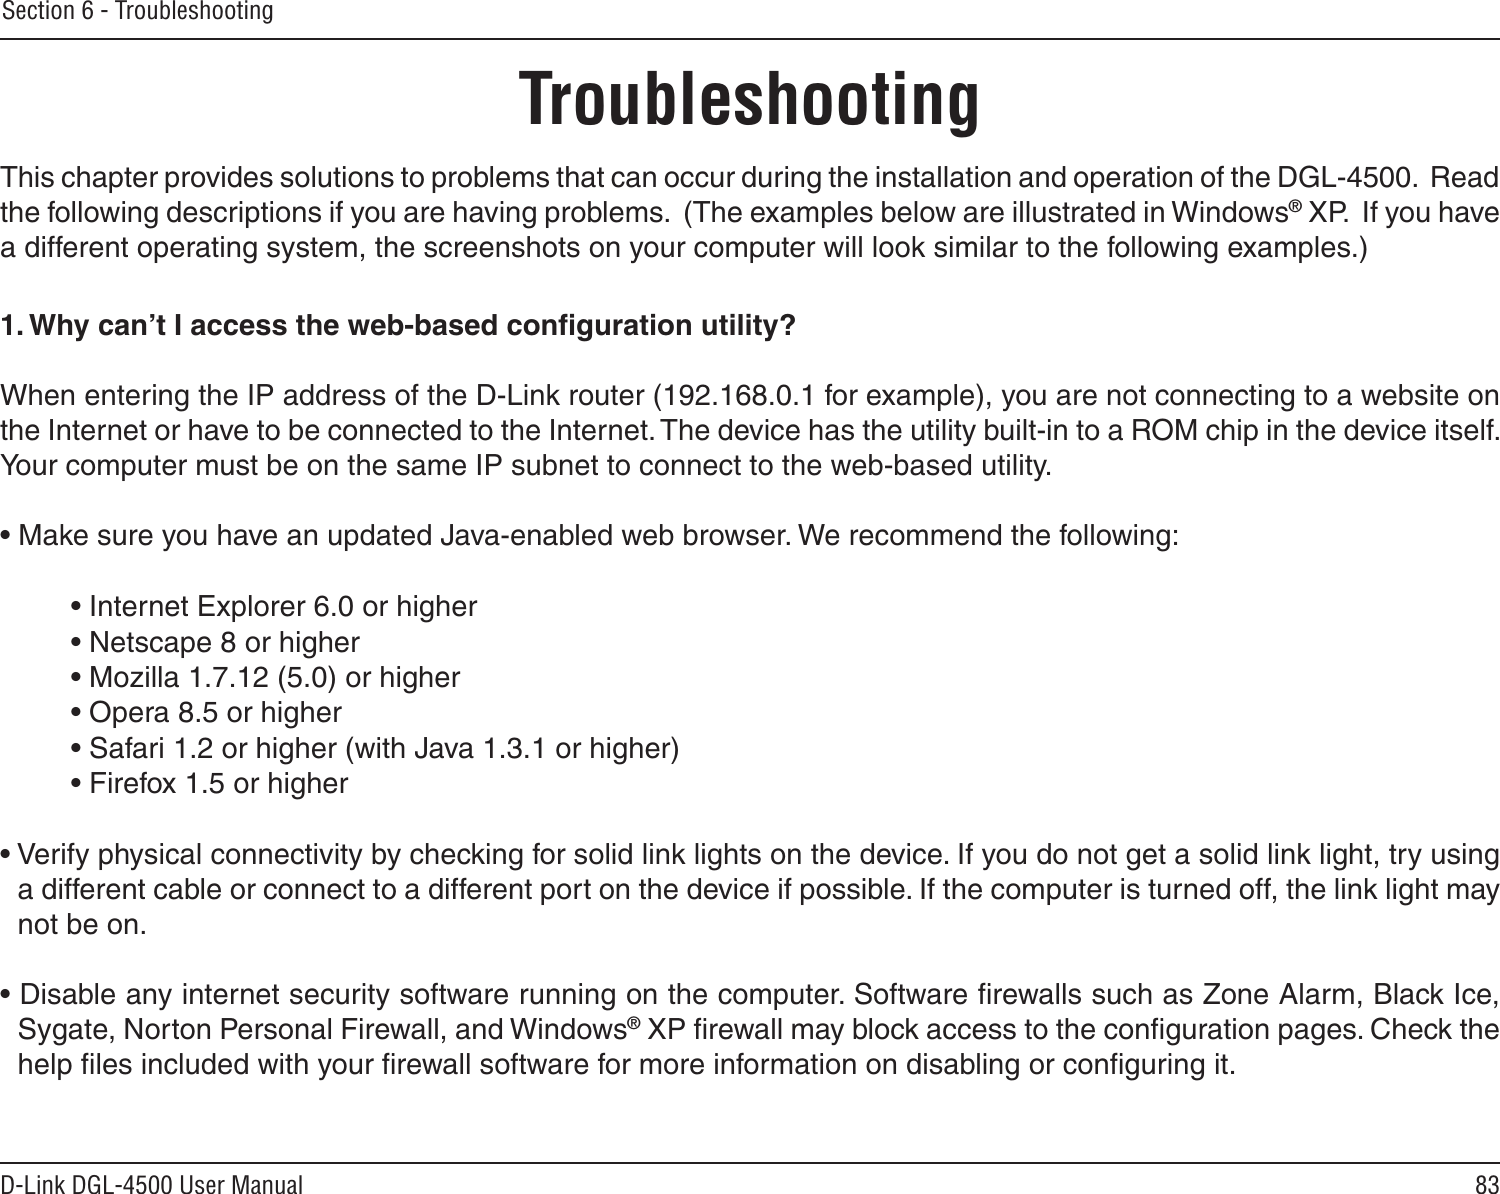 83D-Link DGL-4500 User ManualSection 6 - TroubleshootingTroubleshootingThis chapter provides solutions to problems that can occur during the installation and operation of the DGL-4500.  Read the following descriptions if you are having problems.  (The examples below are illustrated in Windows® XP.  If you have a different operating system, the screenshots on your computer will look similar to the following examples.)1. Why can’t I access the web-based conﬁguration utility?When entering the IP address of the D-Link router (192.168.0.1 for example), you are not connecting to a website on the Internet or have to be connected to the Internet. The device has the utility built-in to a ROM chip in the device itself. Your computer must be on the same IP subnet to connect to the web-based utility. • Make sure you have an updated Java-enabled web browser. We recommend the following: • Internet Explorer 6.0 or higher • Netscape 8 or higher • Mozilla 1.7.12 (5.0) or higher • Opera 8.5 or higher • Safari 1.2 or higher (with Java 1.3.1 or higher) • Firefox 1.5 or higher • Verify physical connectivity by checking for solid link lights on the device. If you do not get a solid link light, try using a different cable or connect to a different port on the device if possible. If the computer is turned off, the link light may not be on.• Disable any internet security software running on the computer. Software ﬁrewalls such as Zone Alarm, Black Ice, Sygate, Norton Personal Firewall, and Windows® XP ﬁrewall may block access to the conﬁguration pages. Check the help ﬁles included with your ﬁrewall software for more information on disabling or conﬁguring it.